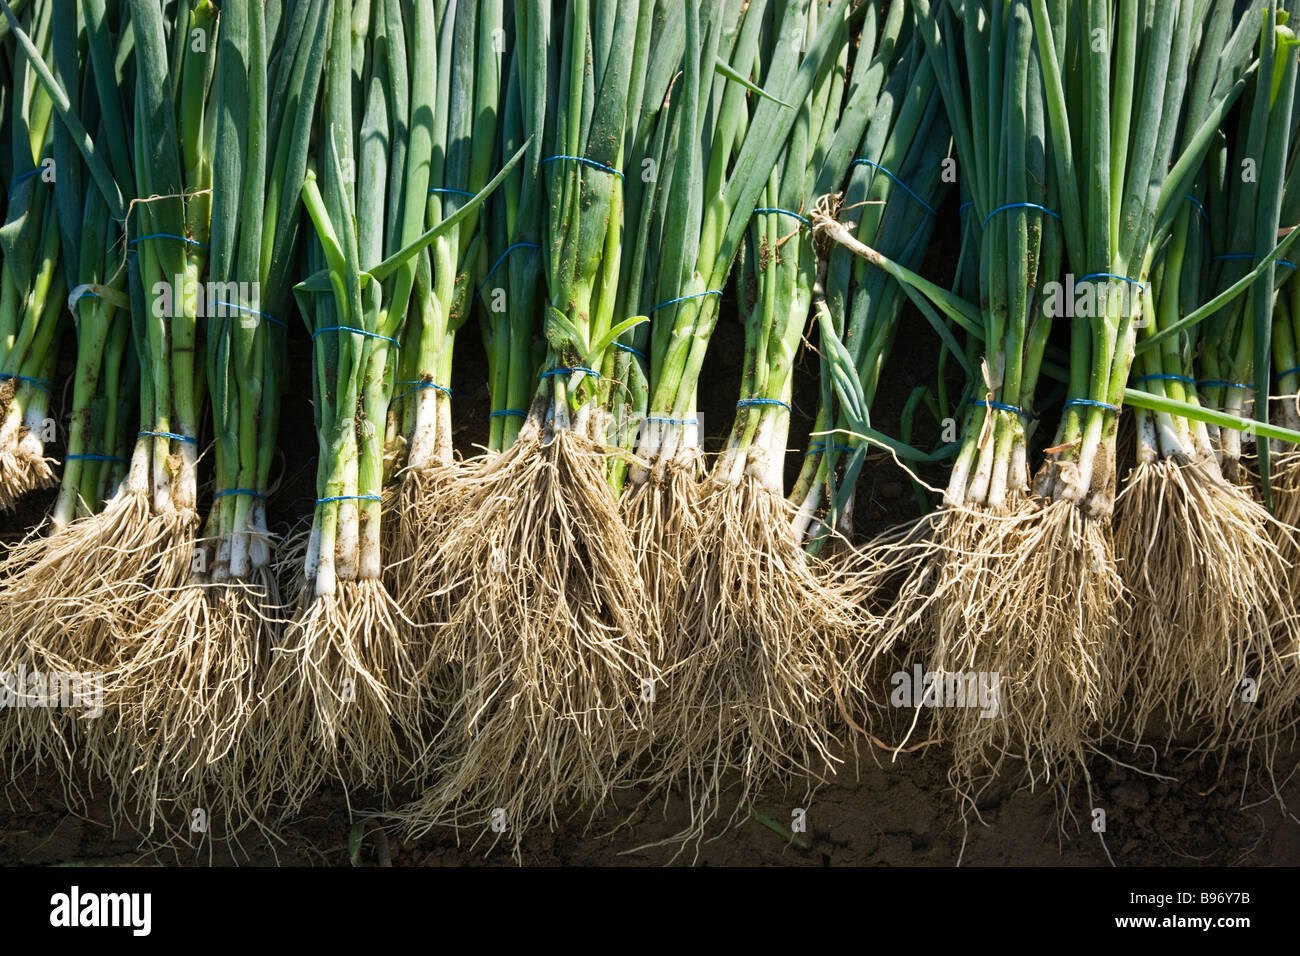 Harvested Scallions organically grown. Stock Photo